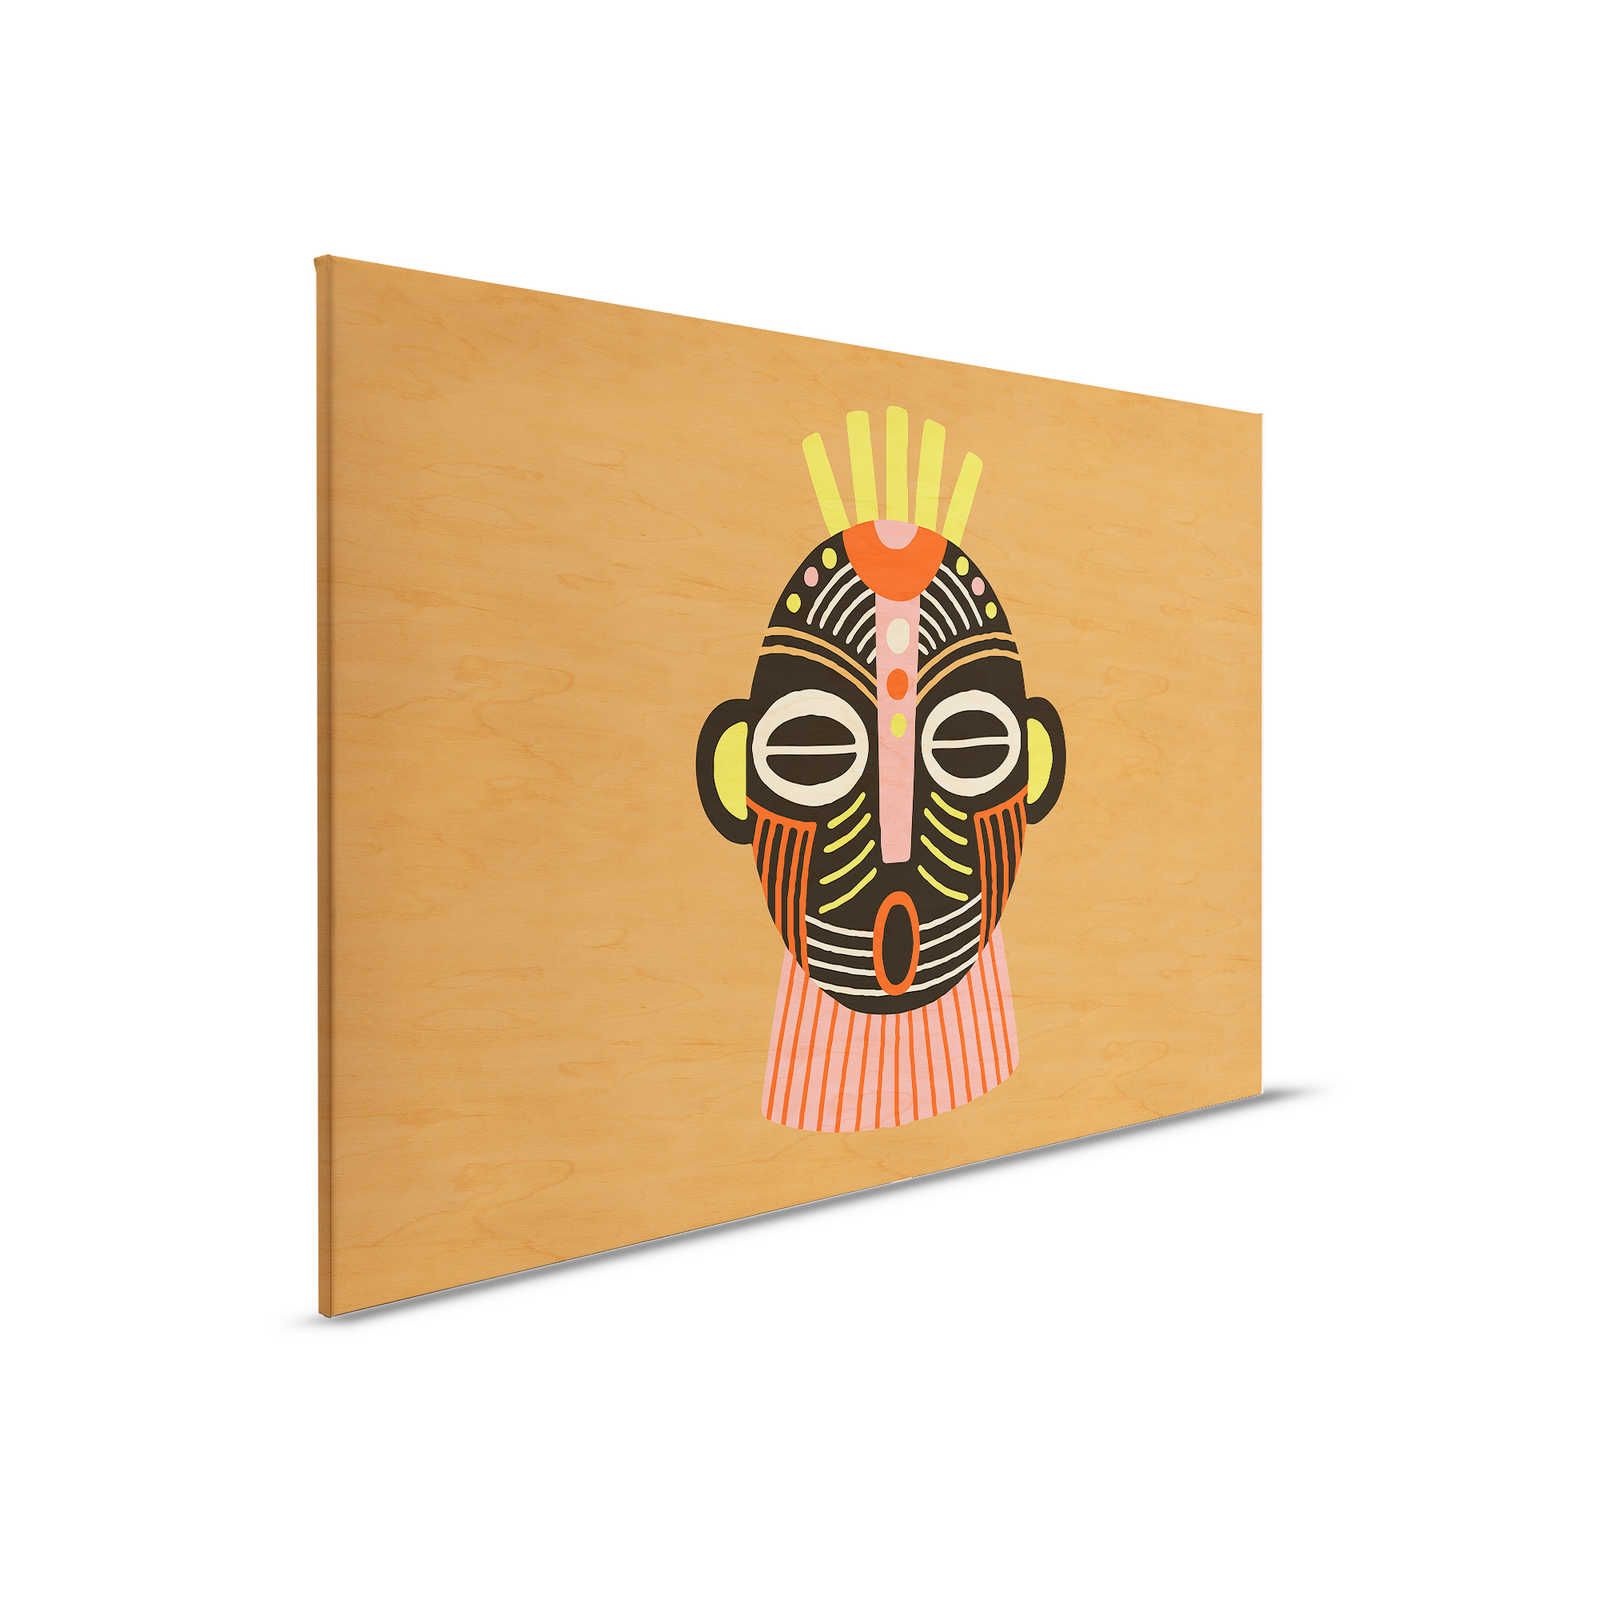         Overseas 4 - Canvas painting Africa Design Inspiration Mask - 0,90 m x 0,60 m
    